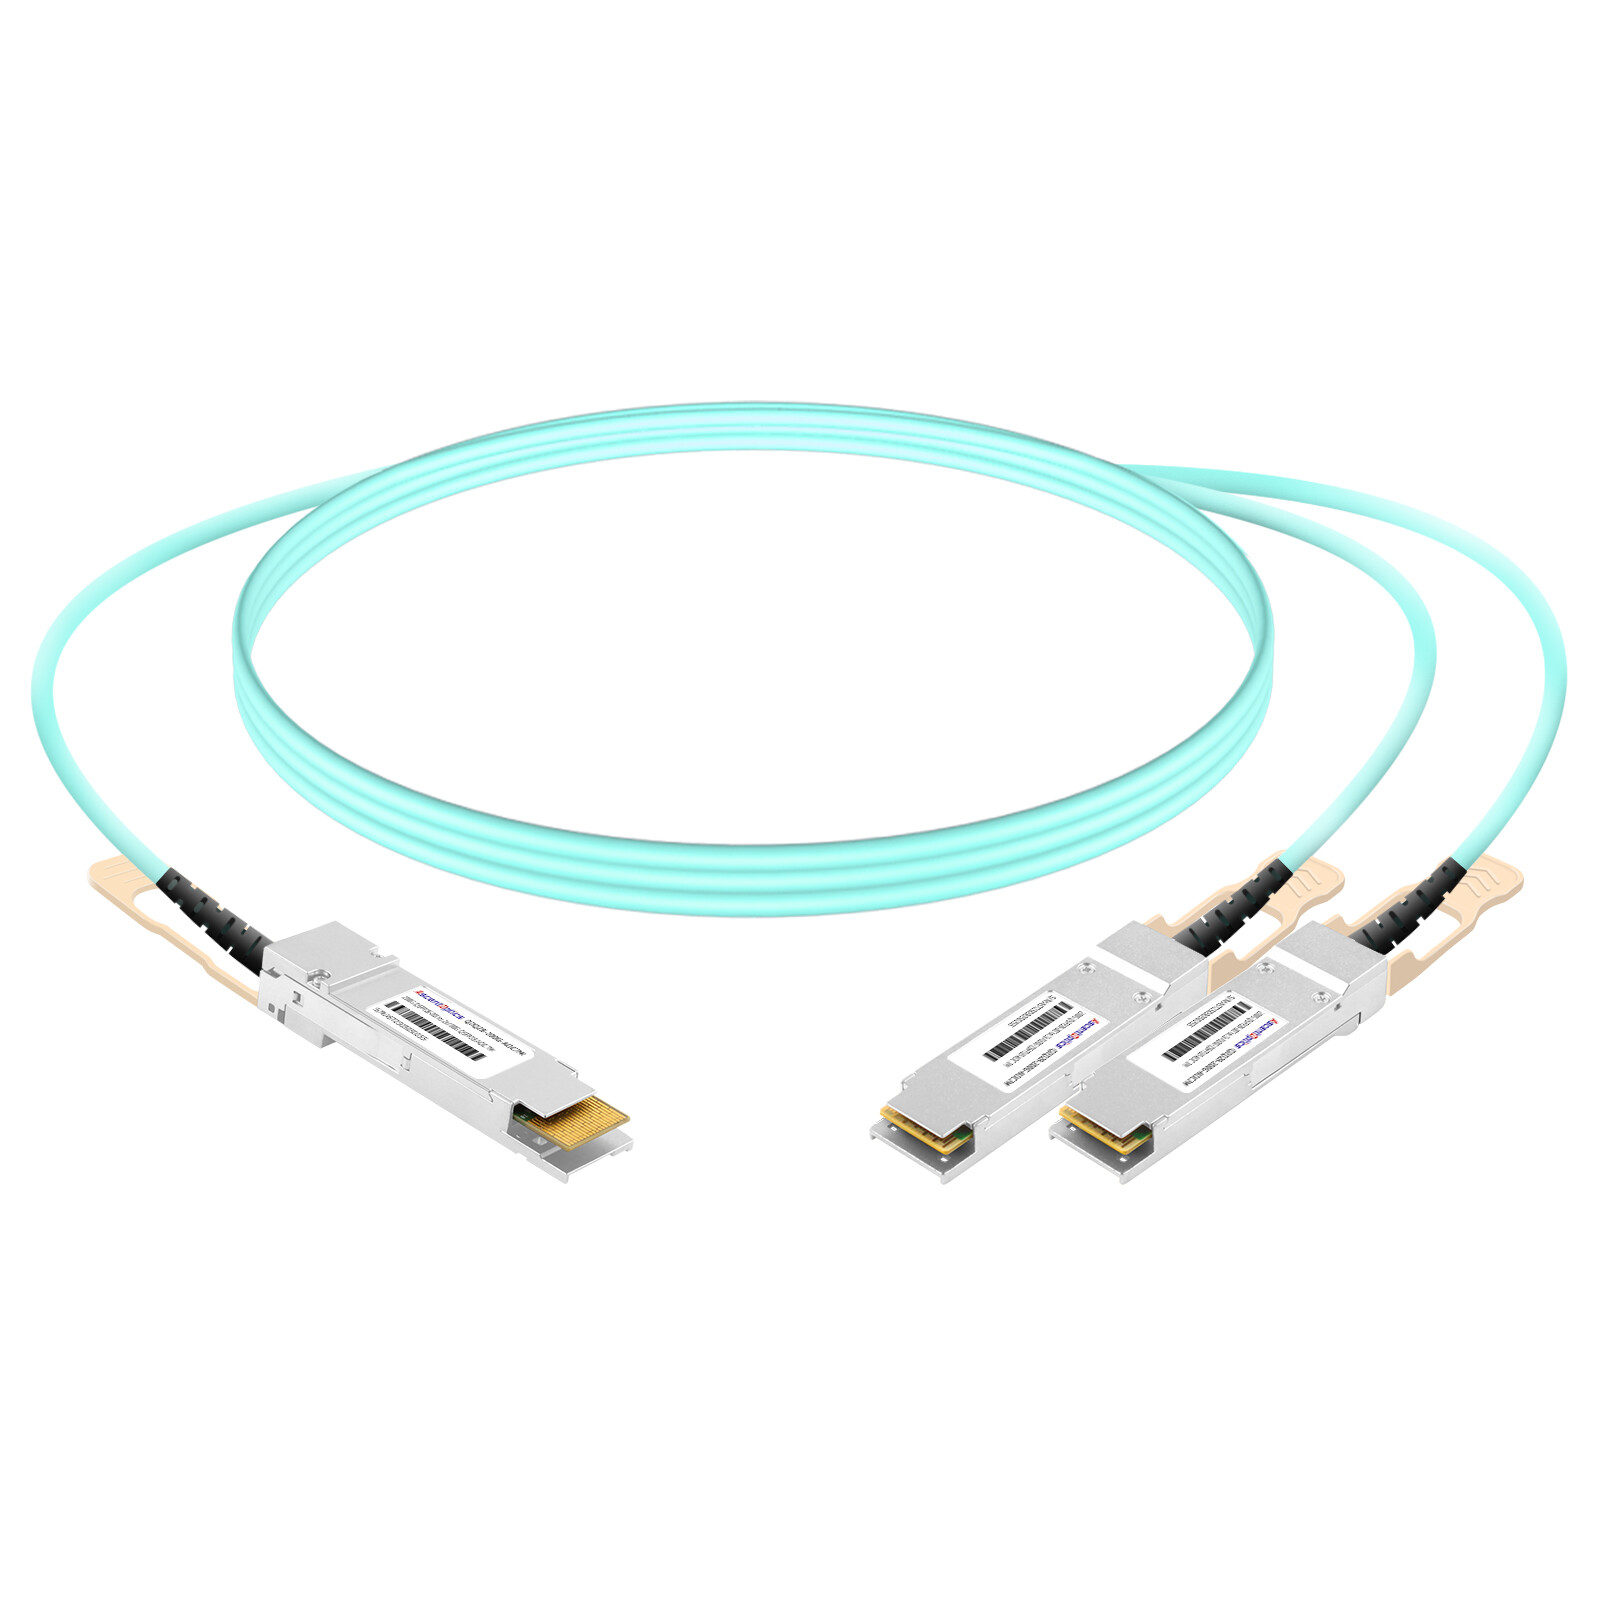 200G QSFP28-DD to 2x 100G QSFP28 Breakout AOC Cable,7 Meters